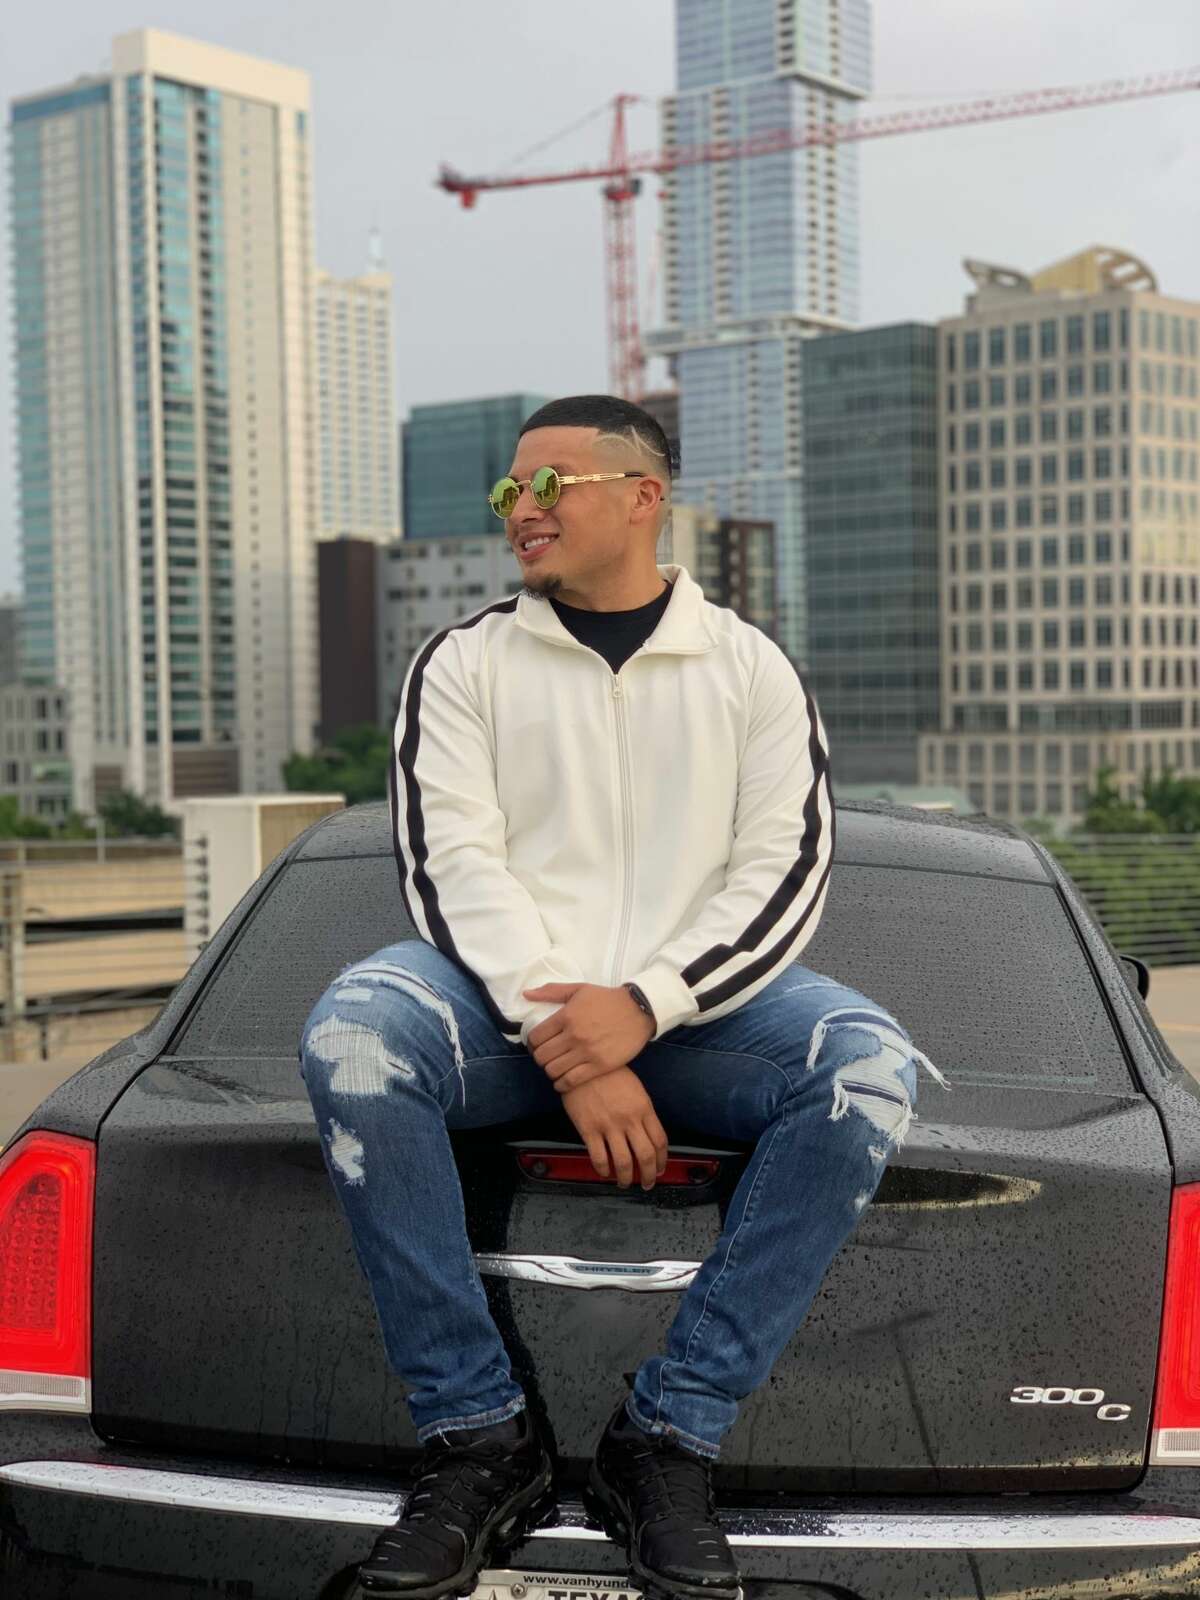 Plainview native Davien Garcia rose to social media fame on TikTok and now has a contract with a talent agent.